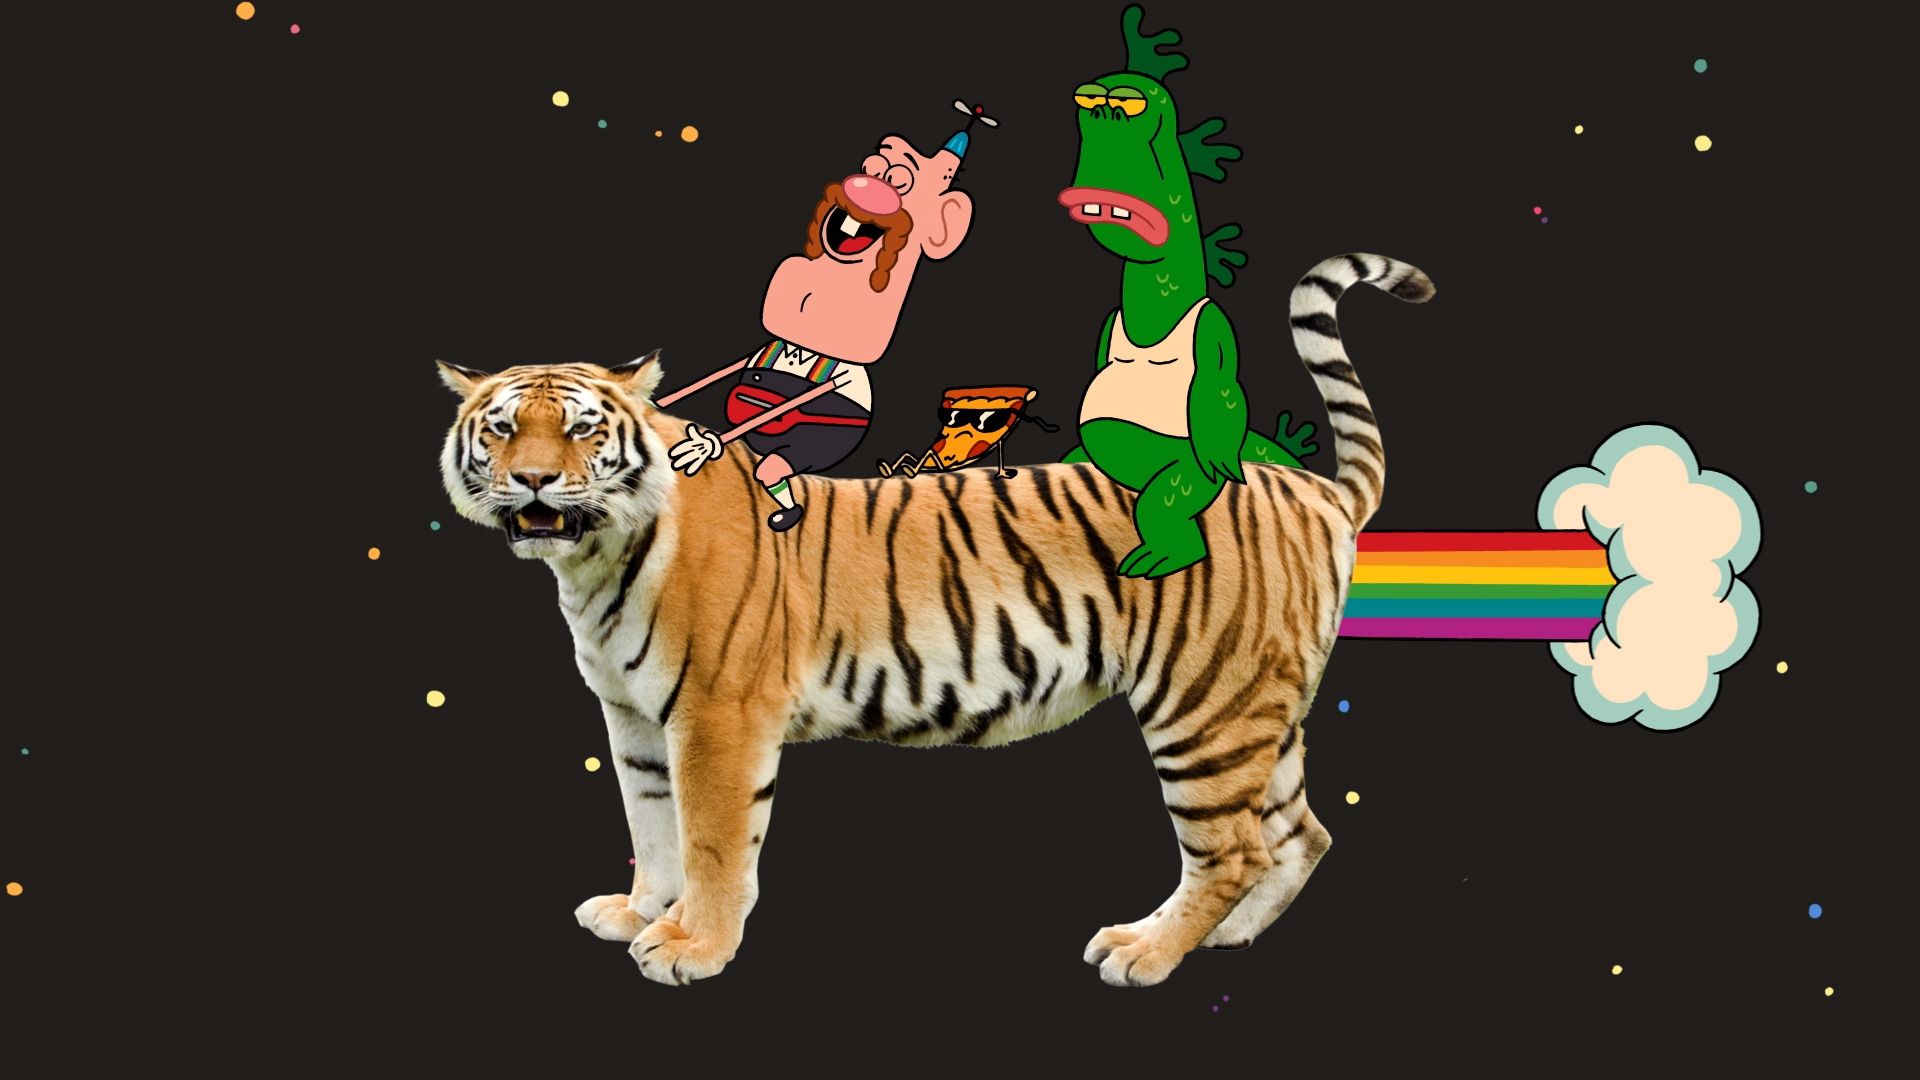 Uncle Grandpa What Was the Cartoon About (And Why Did It End)